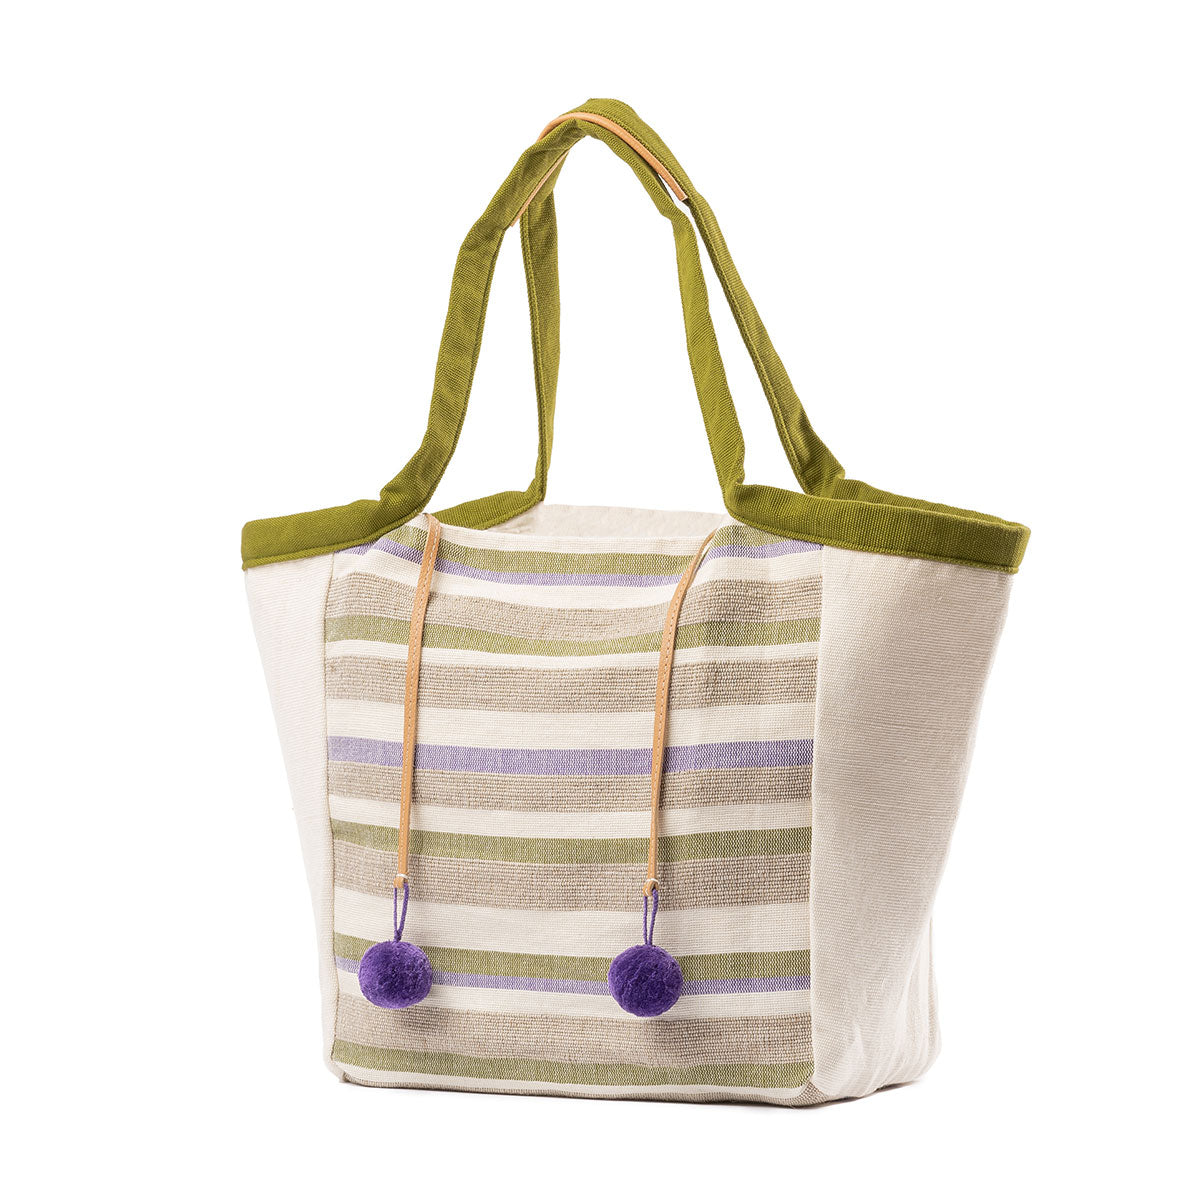 An angle view of the hand woven artisan Rosa Tote in Woodland Stripes.  The center has a pastel green, purple, and beige horizontal stripe pattern. The sides have beige fabric. It has moss green handles with leather detailing. It has two purple pompoms attached to leather cords.